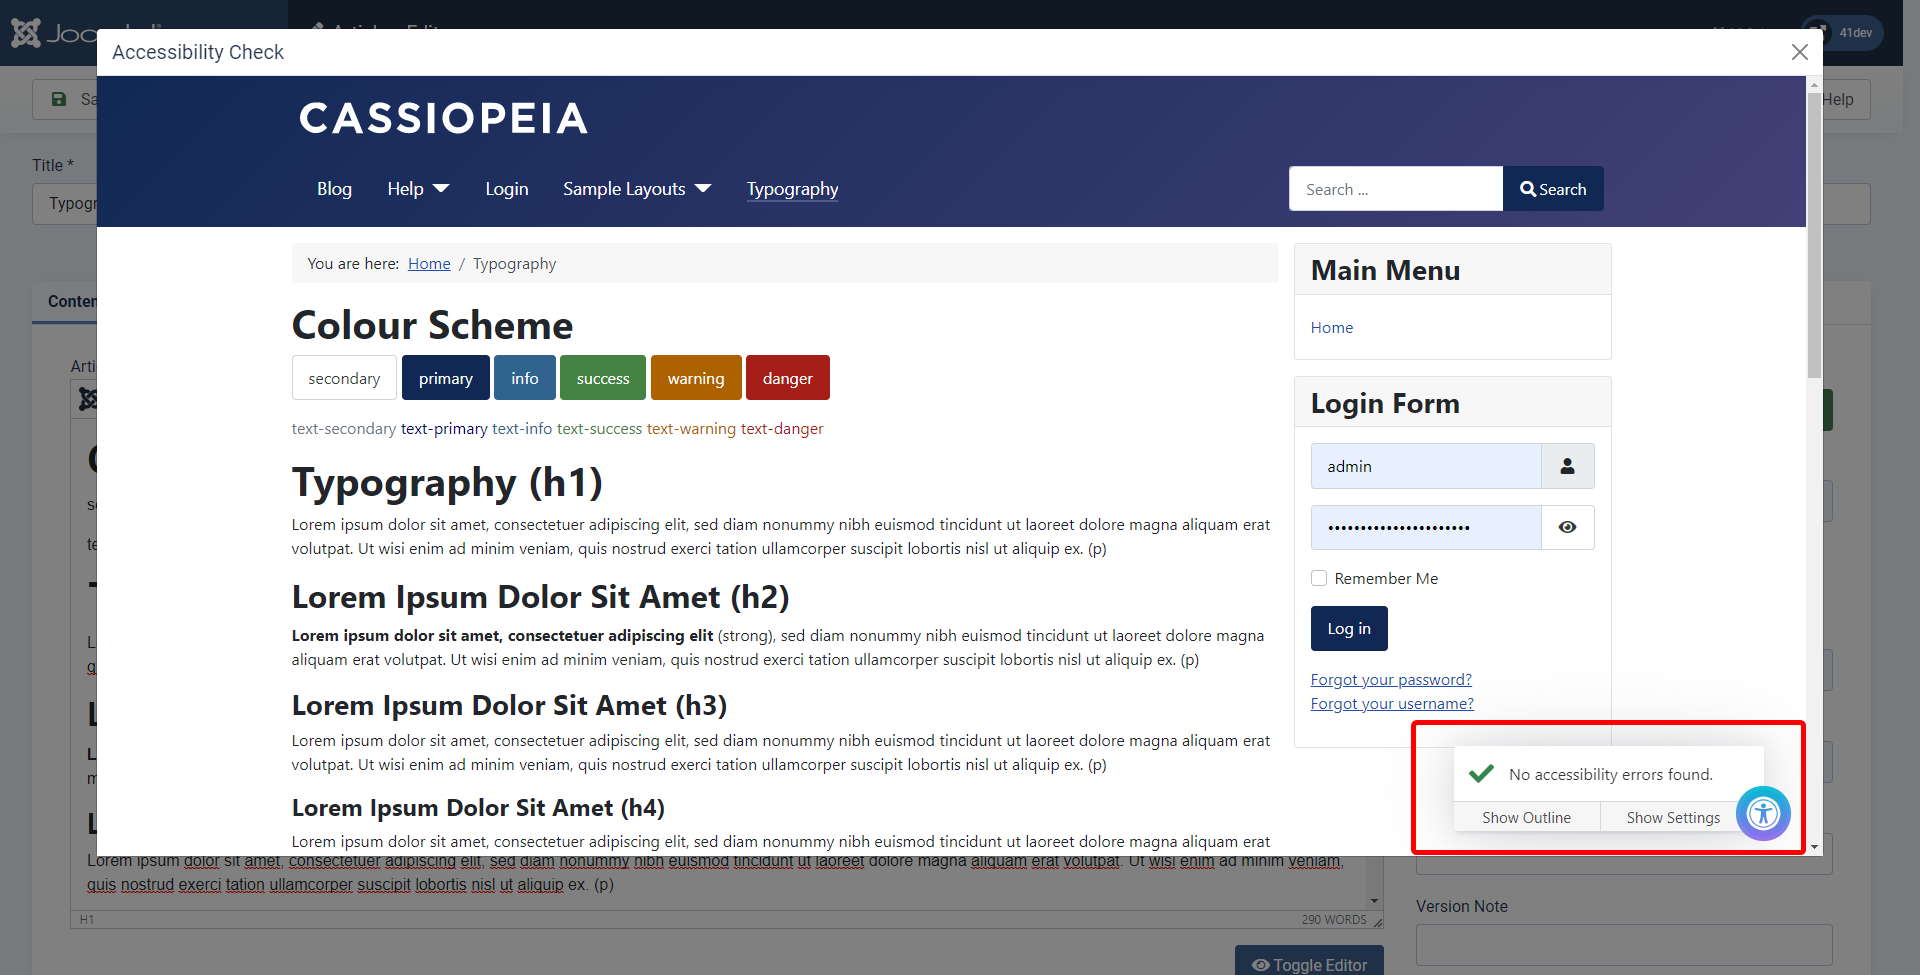 Modal window of the current article with the accessibility checker highlighted